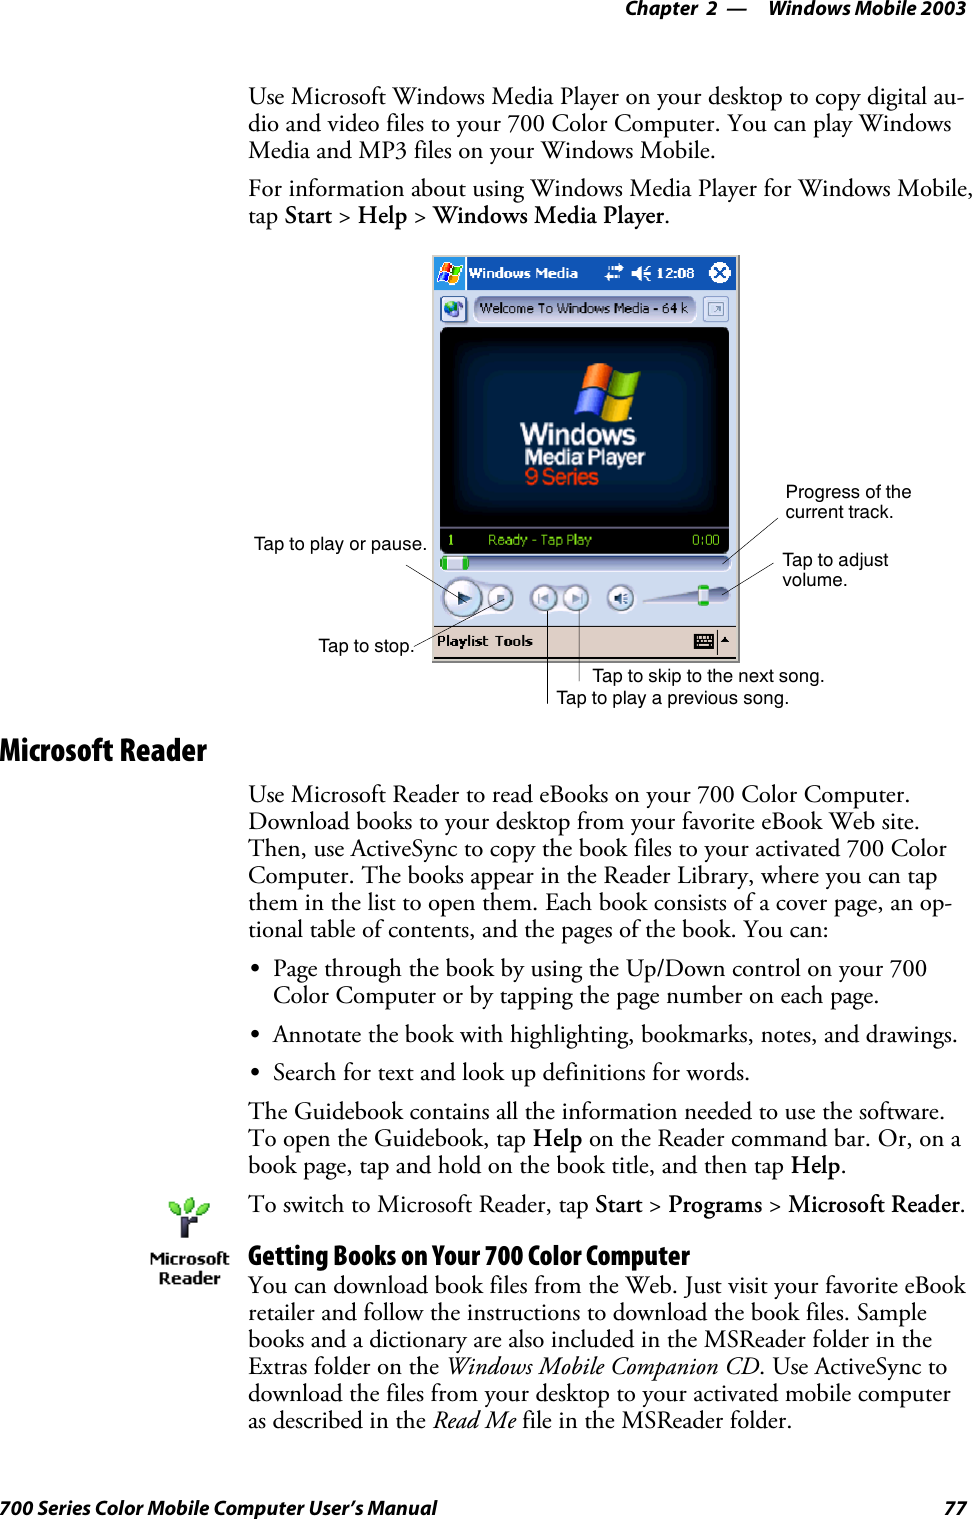 Windows Mobile 2003—Chapter 277700 Series Color Mobile Computer User’s ManualUse Microsoft Windows Media Player on your desktop to copy digital au-dio and video files to your 700 Color Computer. You can play WindowsMedia and MP3 files on your Windows Mobile.For information about using Windows Media Player for Windows Mobile,tap Start &gt;Help &gt;Windows Media Player.Progress of thecurrent track.Tap to adjustvolume.Tap to skip to the next song.Tap to play a previous song.Taptostop.Tap to play or pause.Microsoft ReaderUse Microsoft Reader to read eBooks on your 700 Color Computer.Download books to your desktop from your favorite eBook Web site.Then, use ActiveSync to copy the book files to your activated 700 ColorComputer. The books appear in the Reader Library, where you can tapthem in the list to open them. Each book consists of a cover page, an op-tional table of contents, and the pages of the book. You can:SPage through the book by using the Up/Down control on your 700Color Computer or by tapping the page number on each page.SAnnotate the book with highlighting, bookmarks, notes, and drawings.SSearch for text and look up definitions for words.The Guidebook contains all the information needed to use the software.To open the Guidebook, tap Help on the Reader command bar. Or, on abook page, tap and hold on the book title, and then tap Help.To switch to Microsoft Reader, tap Start &gt;Programs &gt;Microsoft Reader.Getting Books on Your 700 Color ComputerYou can download book files from the Web. Just visit your favorite eBookretailer and follow the instructions to download the book files. Samplebooks and a dictionary are also included in the MSReader folder in theExtras folder on the Windows Mobile Companion CD. Use ActiveSync todownload the files from your desktop to your activated mobile computeras described in the Read Me file in the MSReader folder.